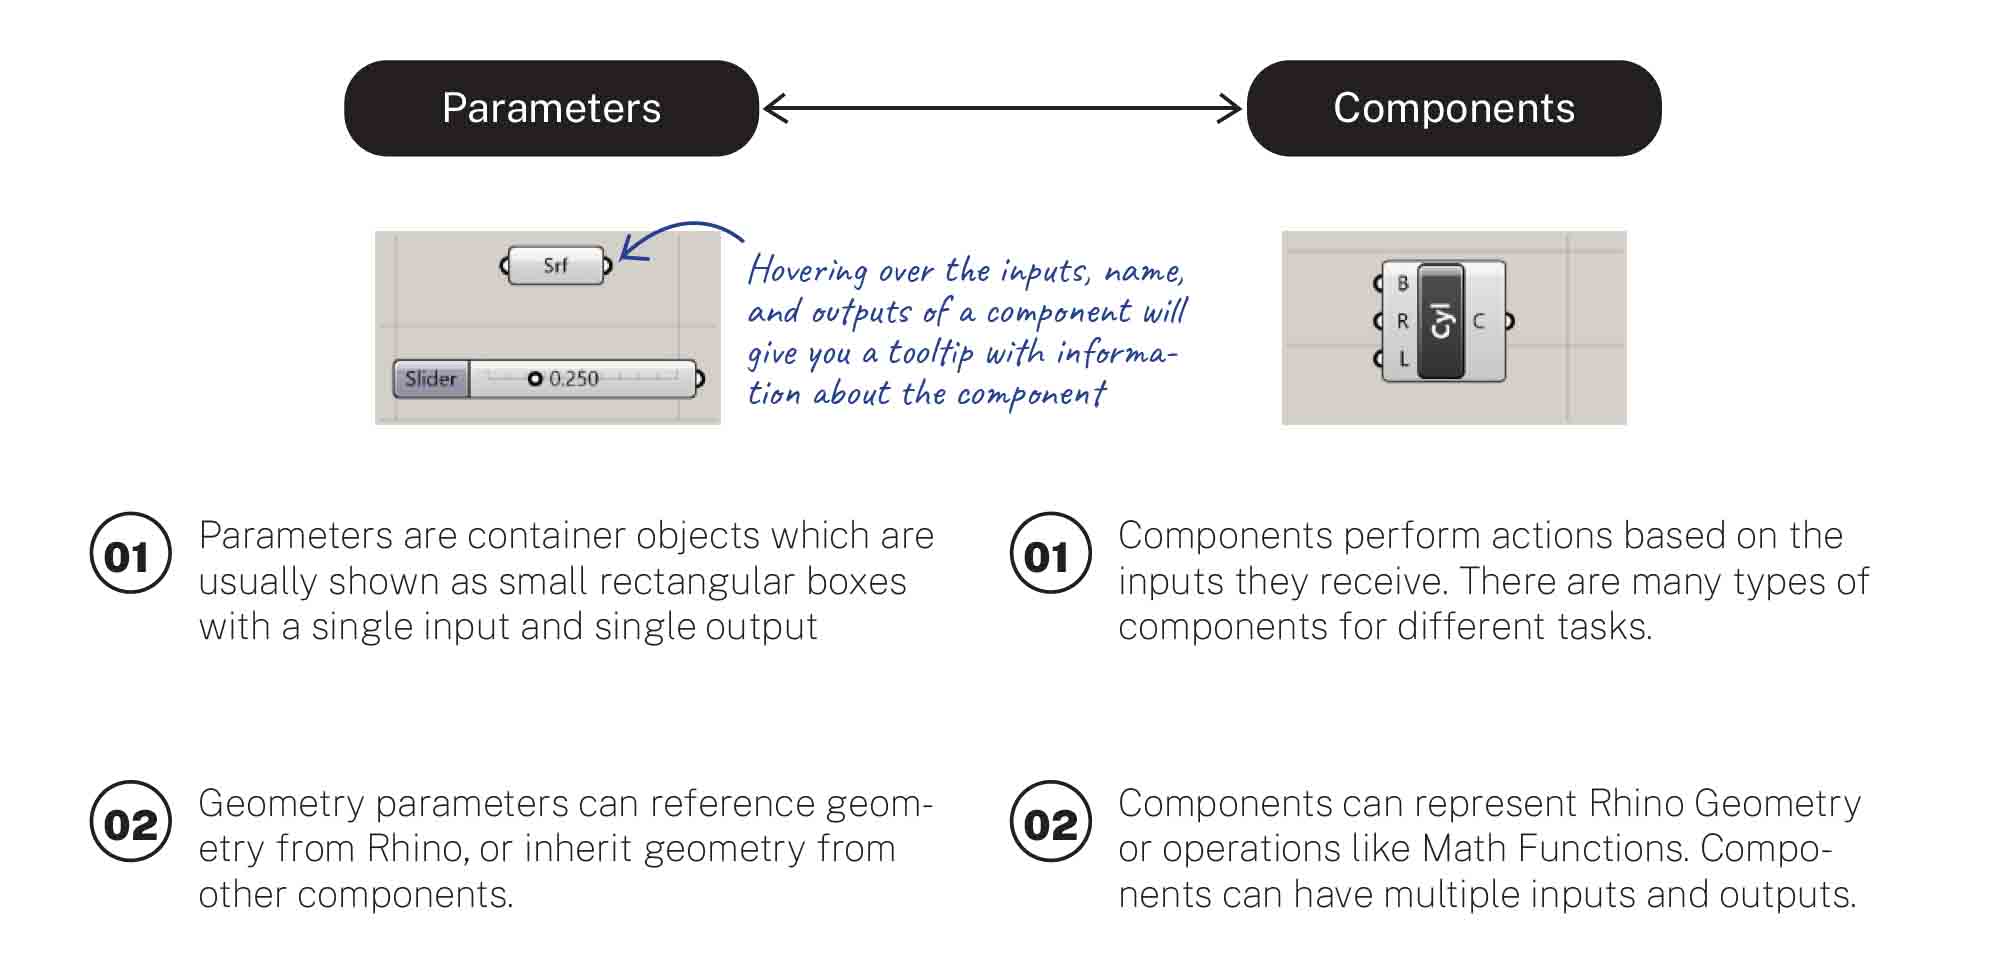 Parameters and Components